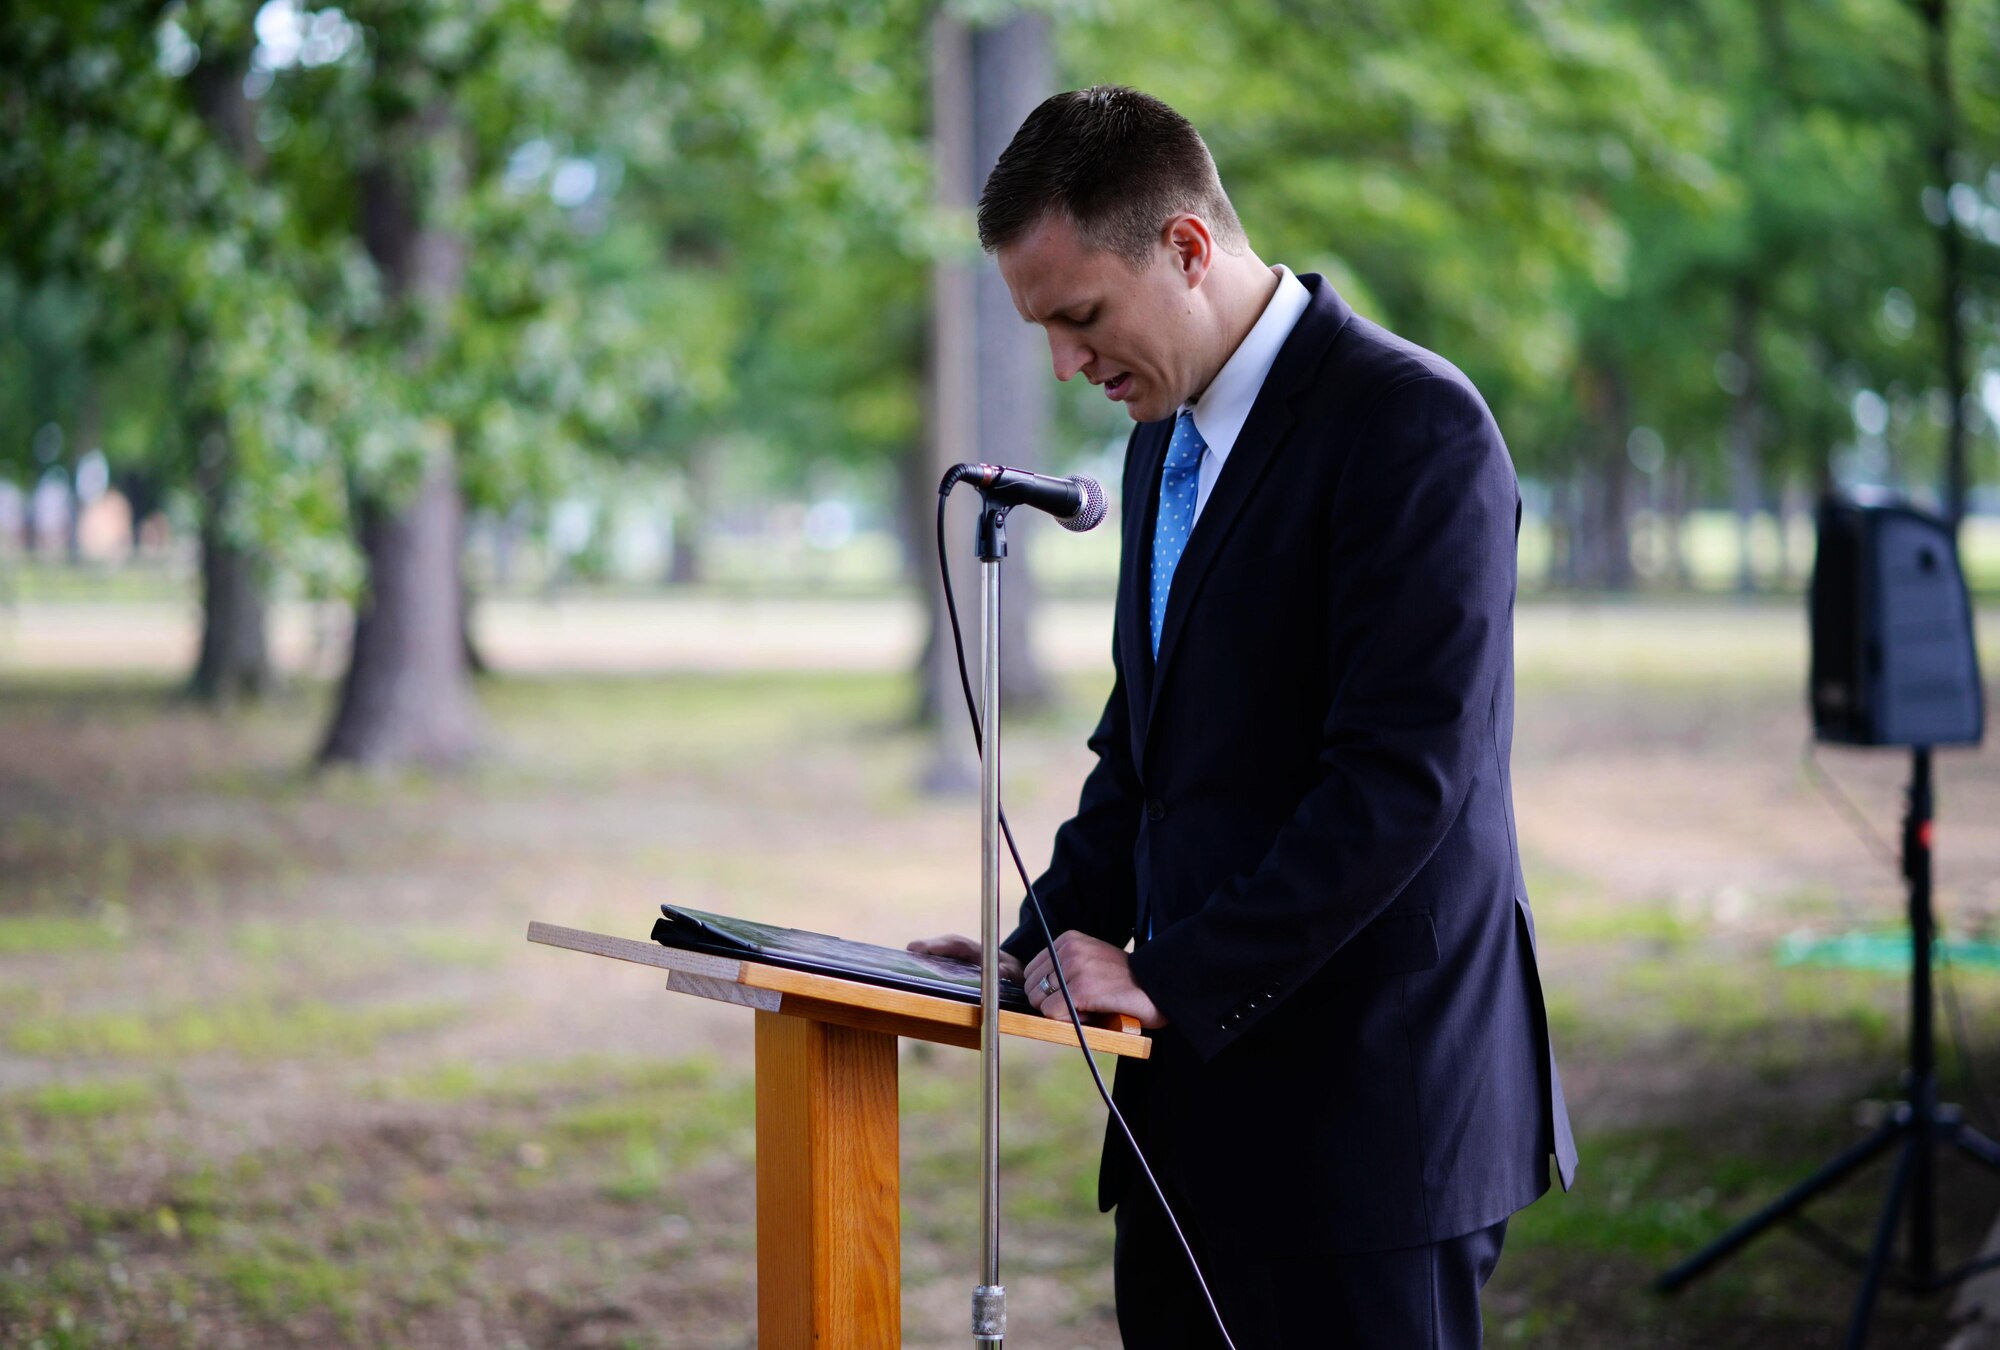 Brandon Campbell, Latter Day Saints Lay leader, says a prayer for Columbus Air Force Base June 10, 2020, at Freedom Park on Columbus AFB, Miss. For anyone not able to attend, the group held a Facebook live event which can be viewed on the Columbus AFB Facebook page. (U.S. Air Force photo by Senior Airman Keith Holcomb)